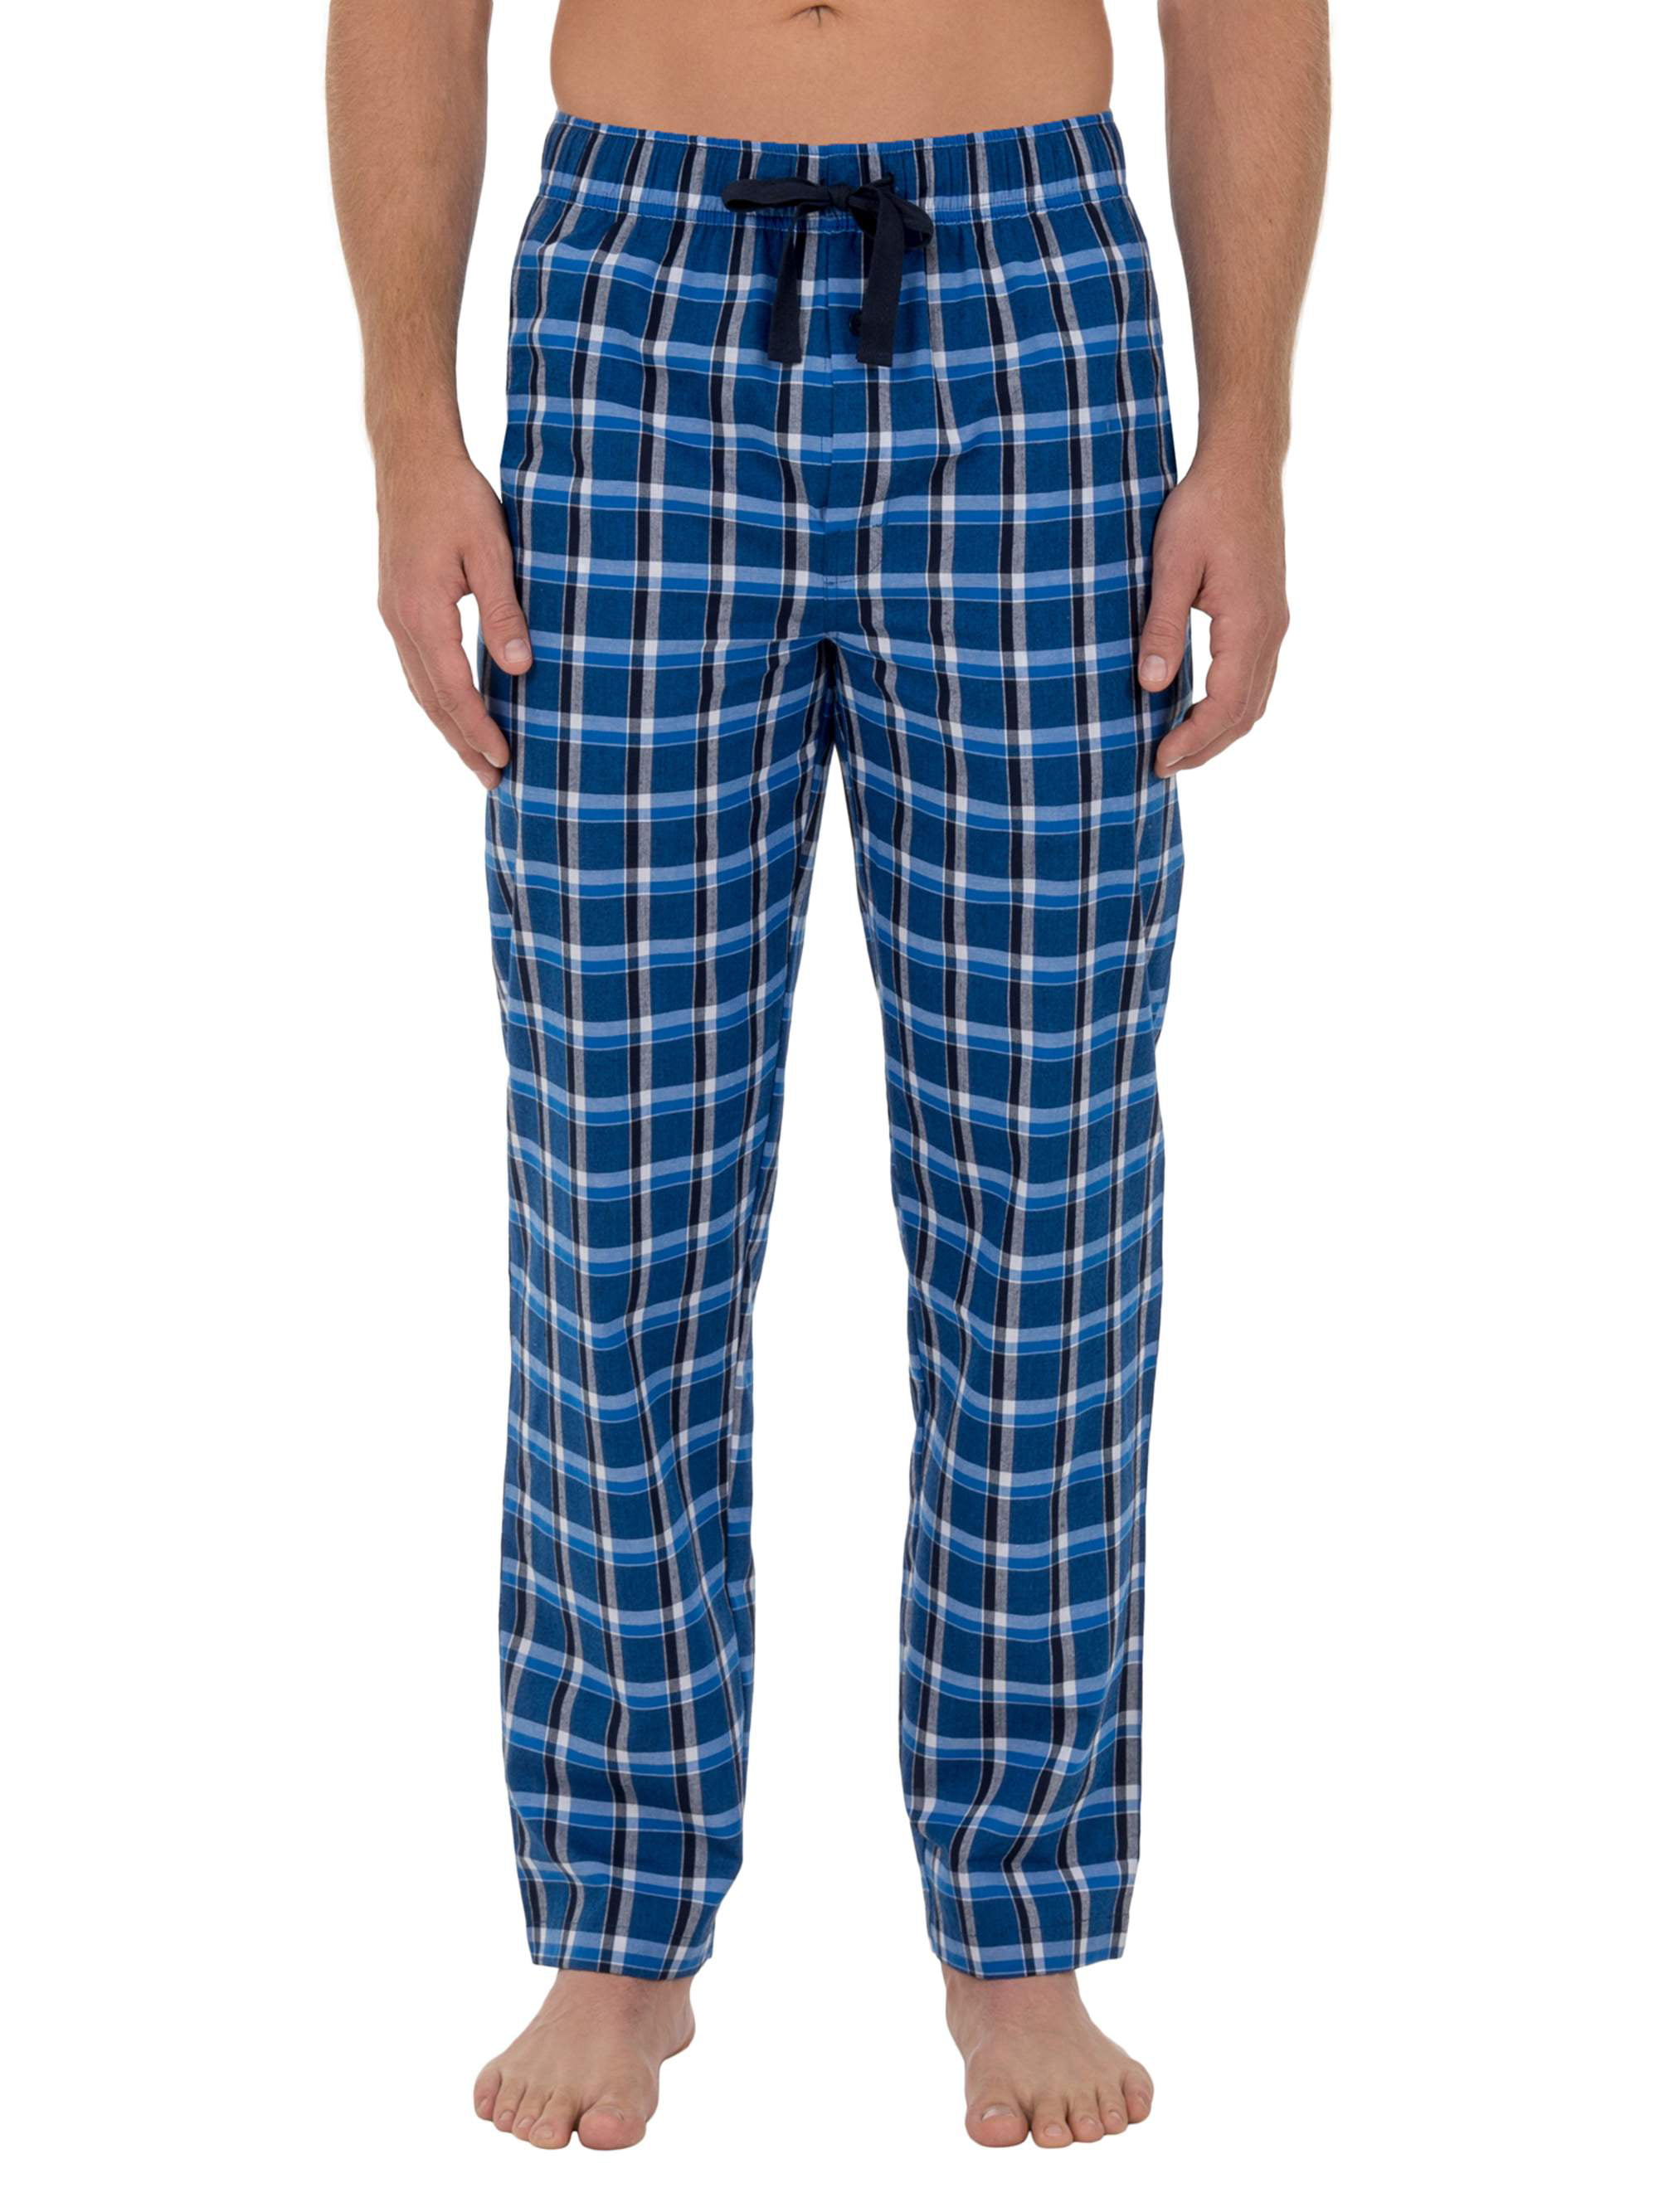 Fruit of the Loom - Fruit of the Loom Men's Microsanded Woven Plaid ...